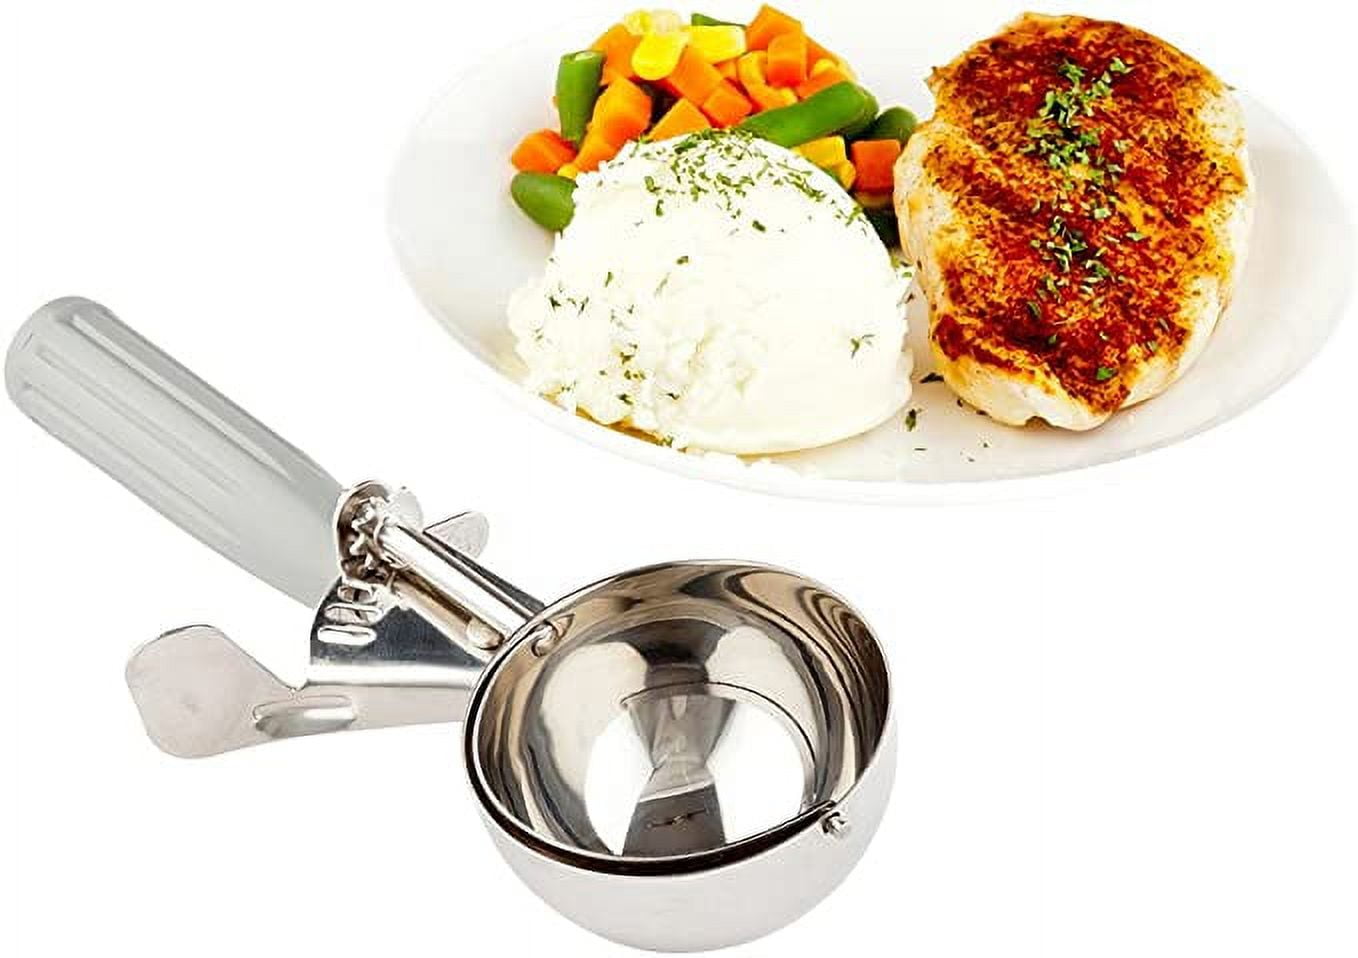 Met Lux 1.9 oz Silver Stainless Steel #16 Ice Cream Scoop - 1 count box